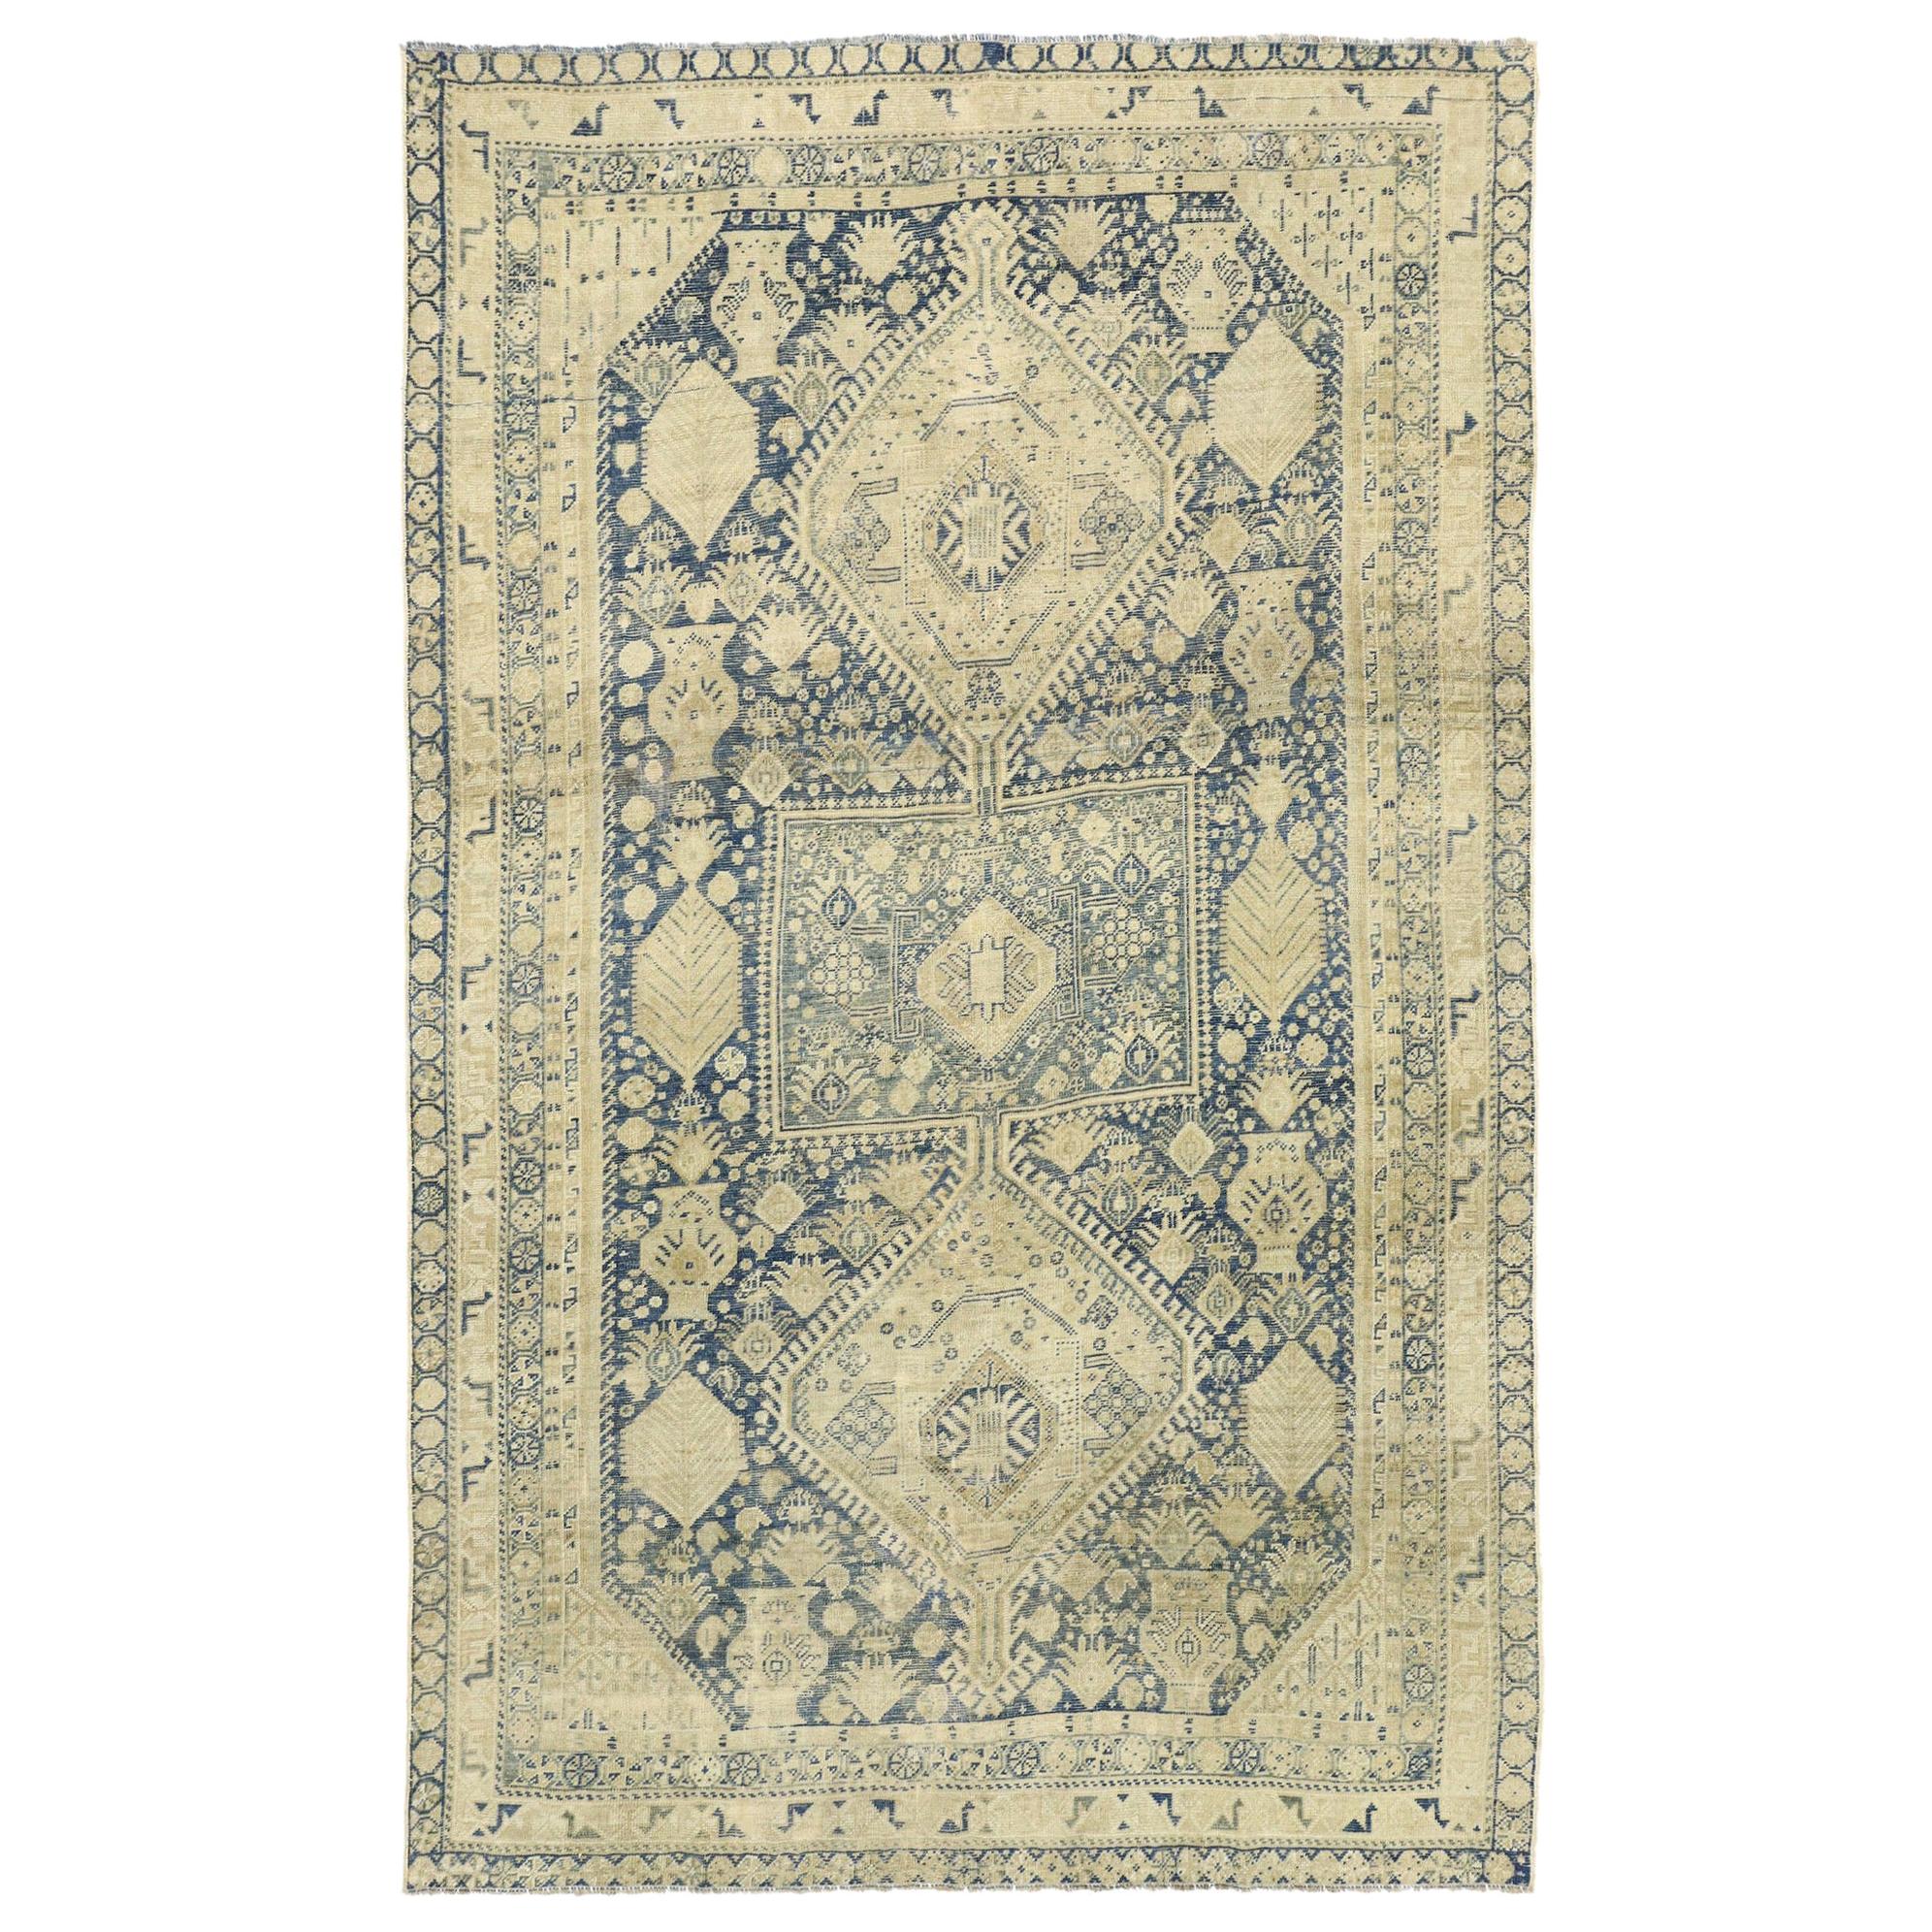 Distressed Antique Persian Shiraz Design Rug with British Colonial Style